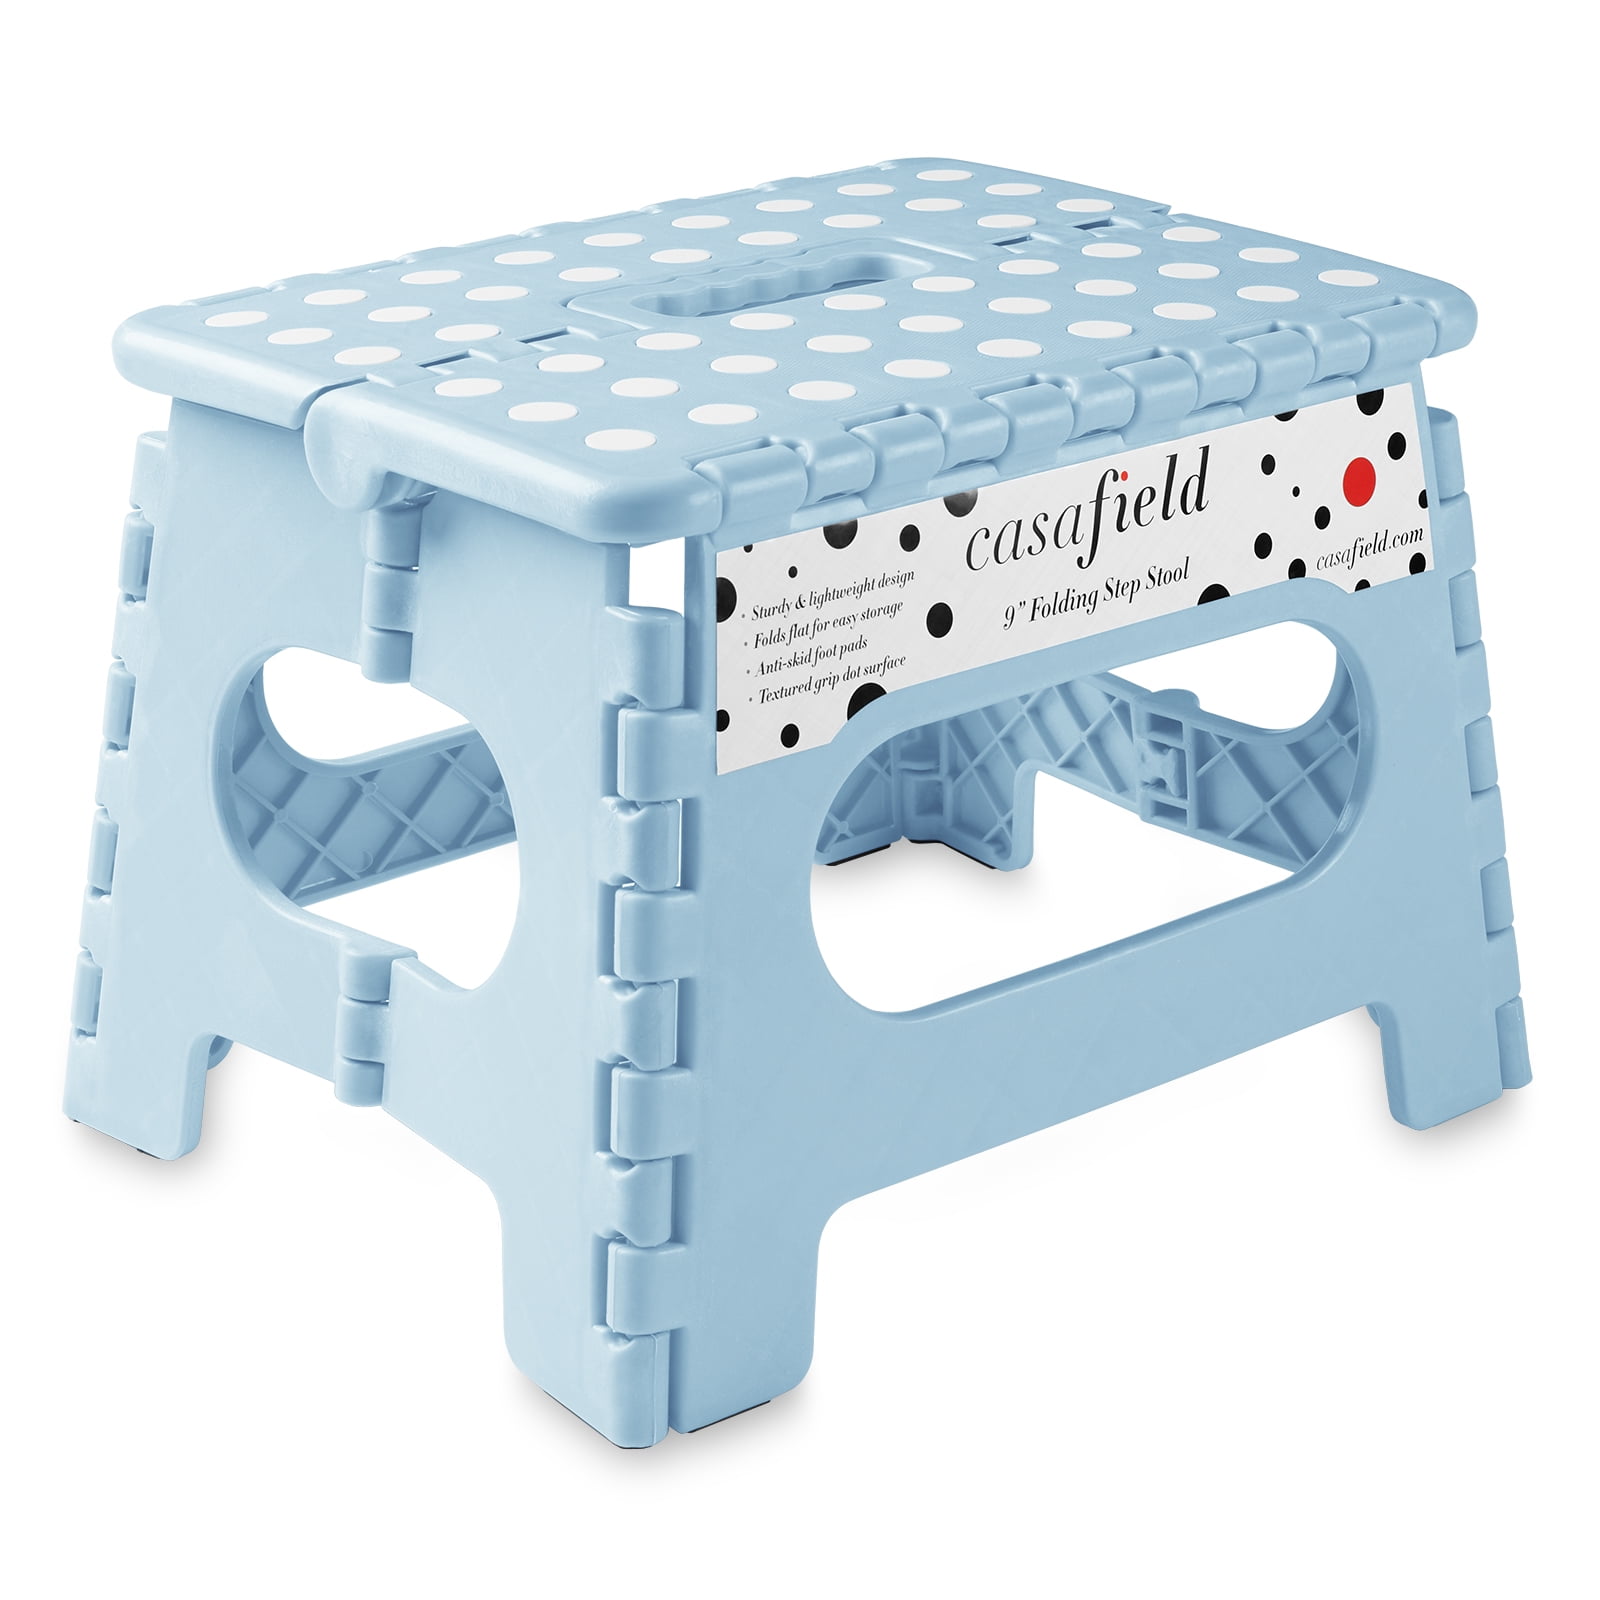 Portable Lightweight Step Stool Plastic Non-Slip Foot Stool for Kids and Adults Opens Easy with One Flip. Whotman Folding Step Stool Foldable Kitchen Step Stool Ideal for Kitchen Bathroom